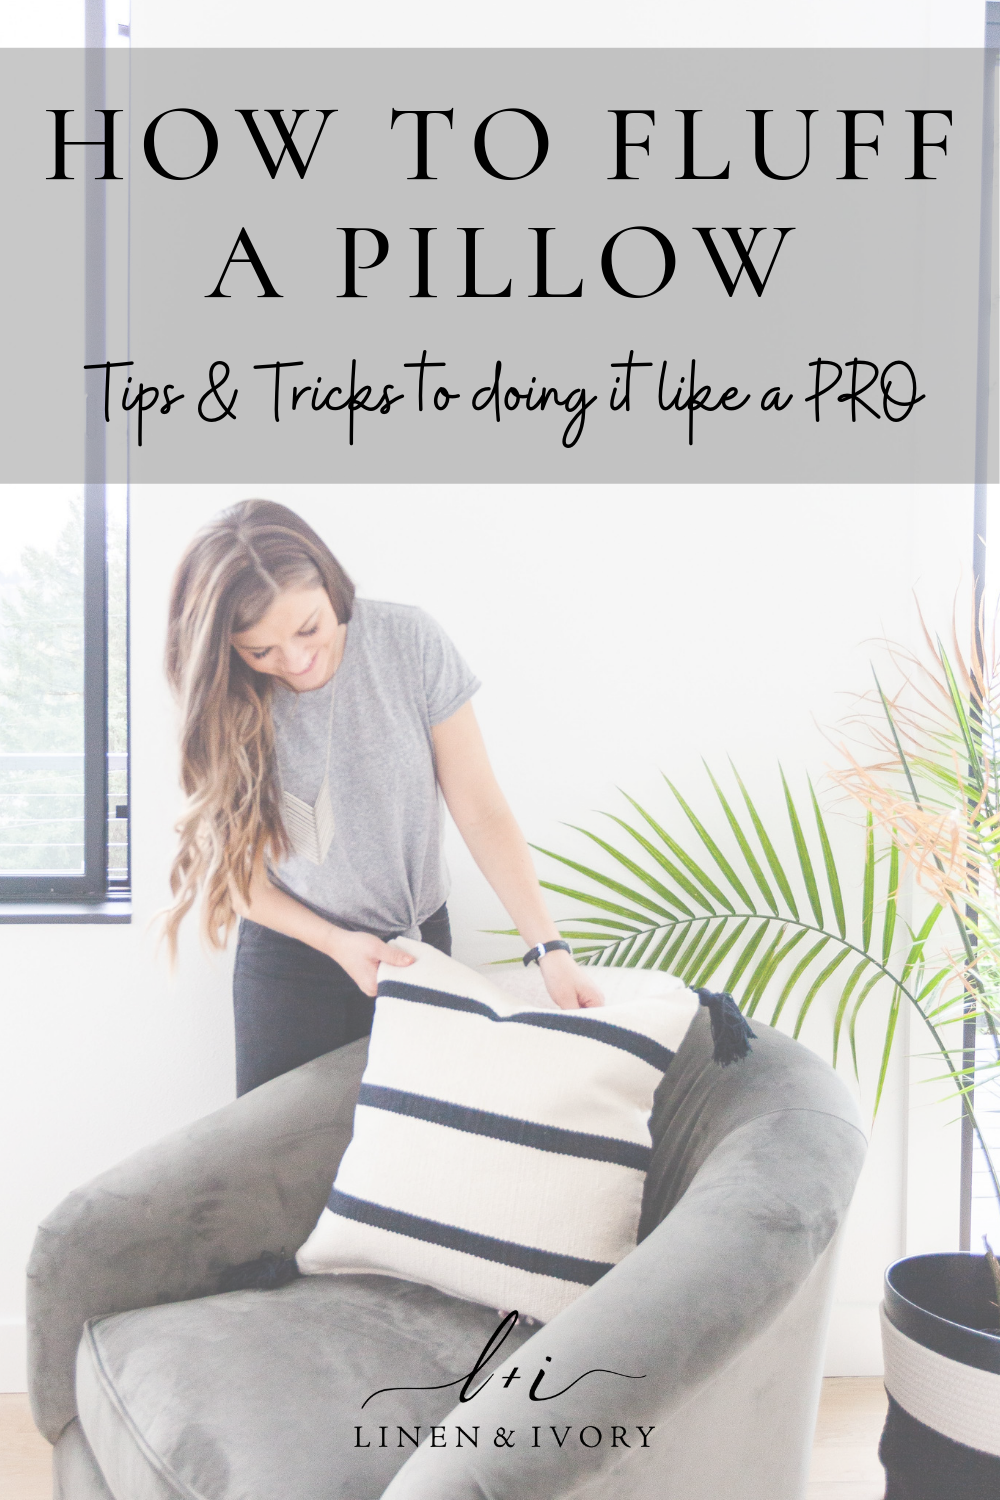 How to Fluff a Pillow- the secret tips and tricks to do it like a pro.